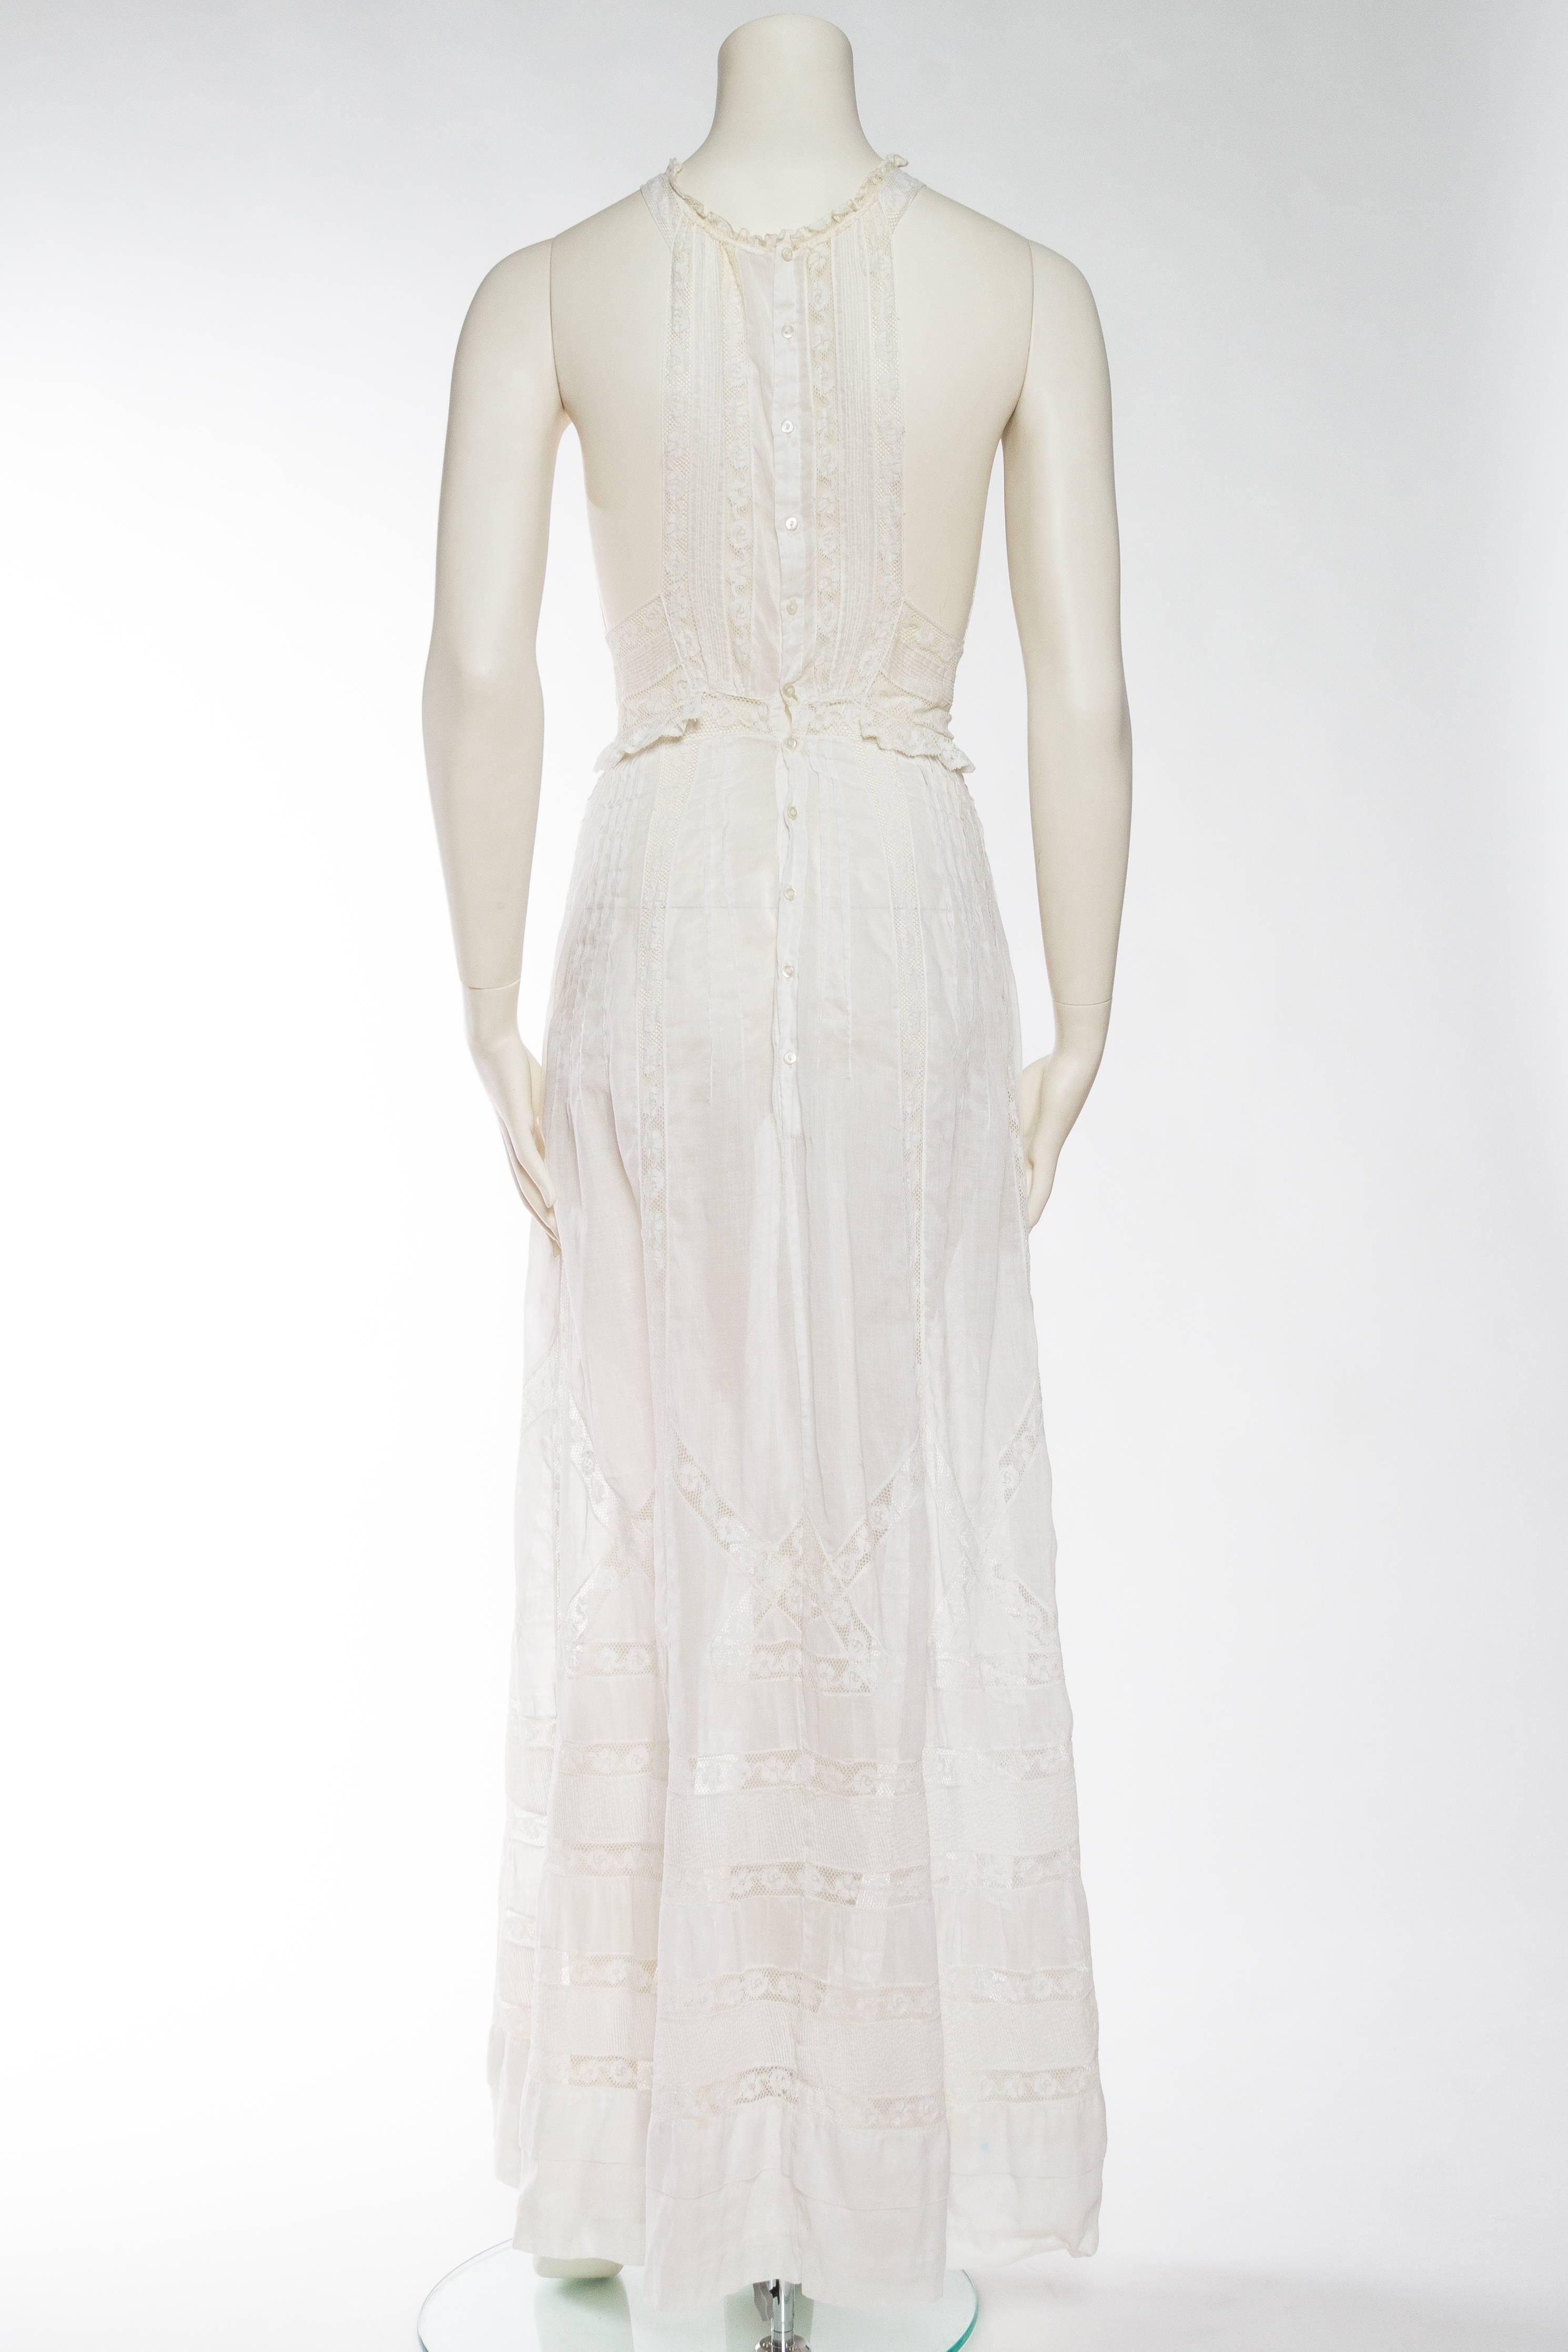 1905 Cotton and Lace Dress In Excellent Condition In New York, NY